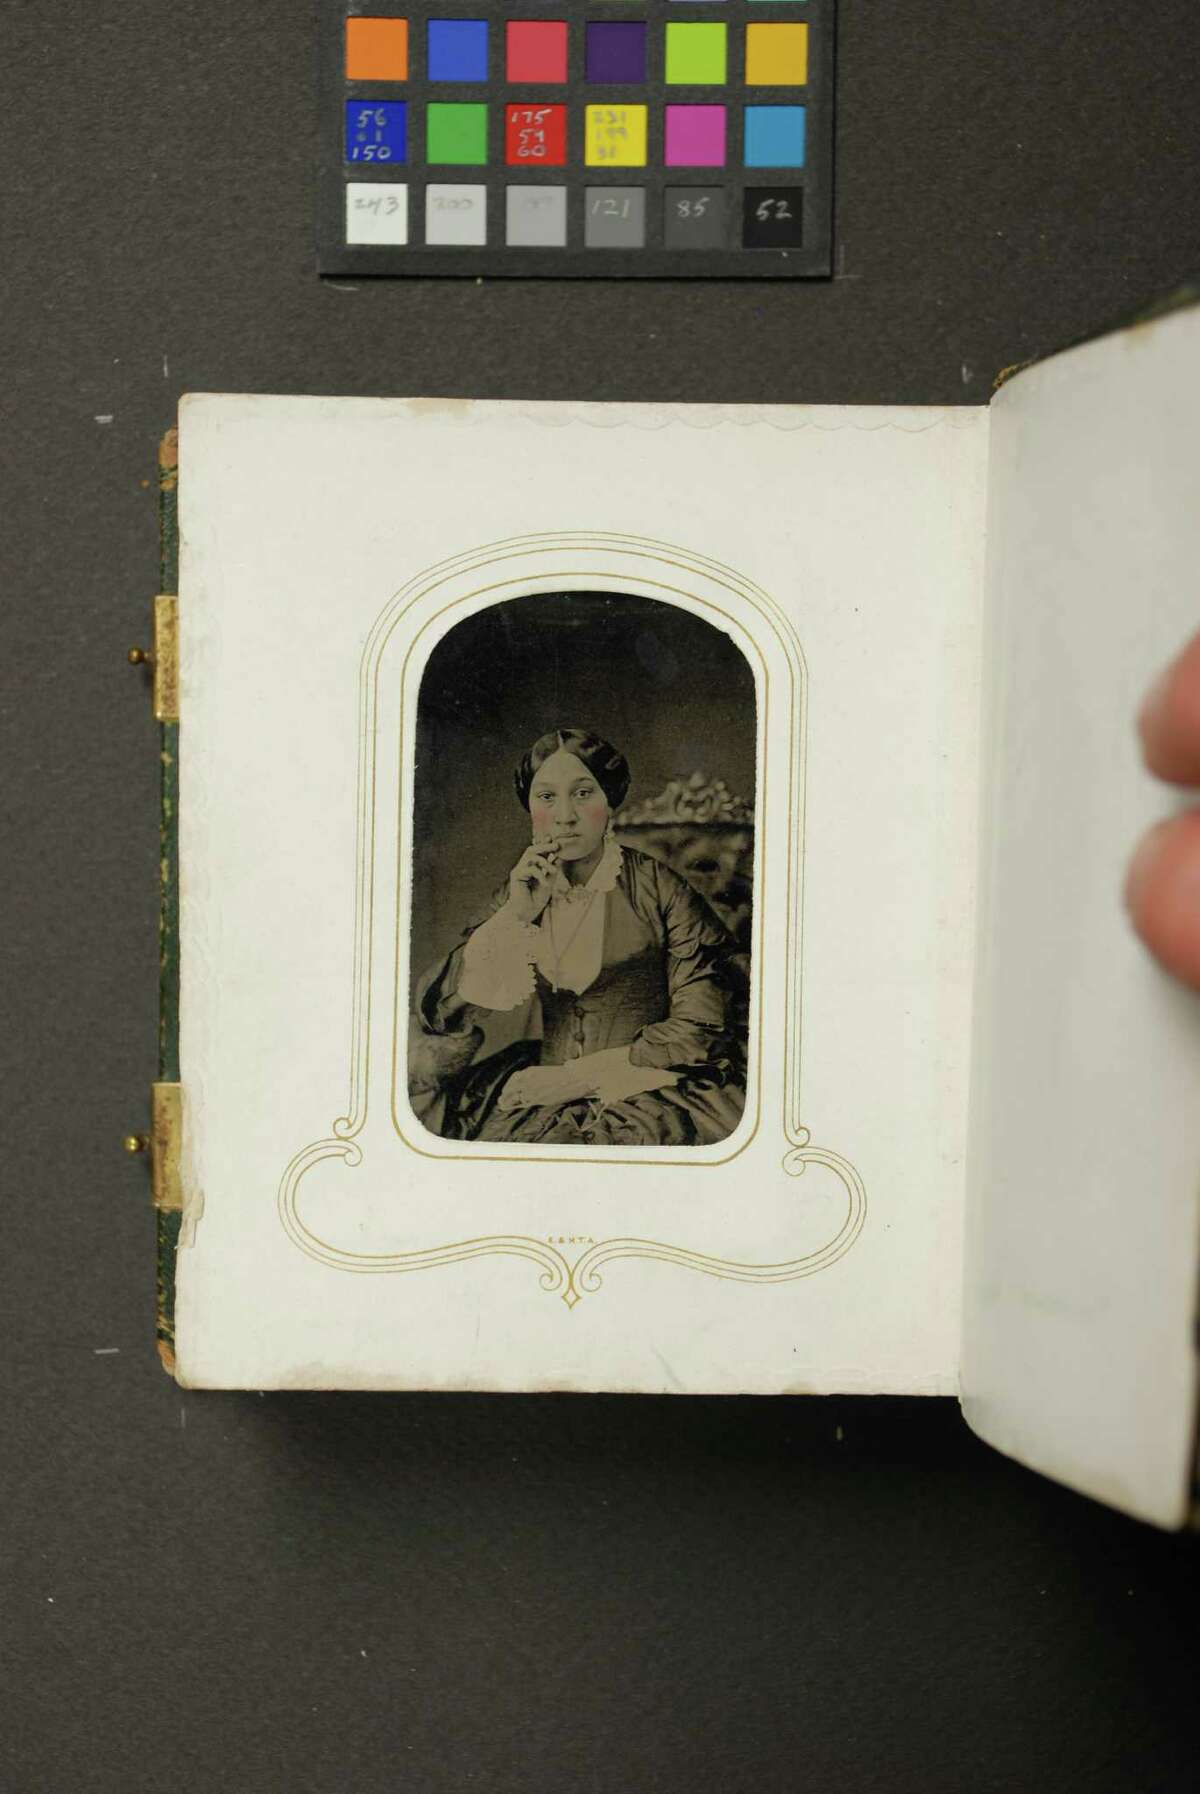 Photo albums found in the William L. Clements Library collection at the University of Michigan tell the story of Arabella Chapman, the first African-American to graduate from Albany Free Academy, today Albany High School, in the 1800s. This photo was taken when she was between the ages of 18 and 20, around the time she graduated. (William L. Clements Library, University of Michigan)